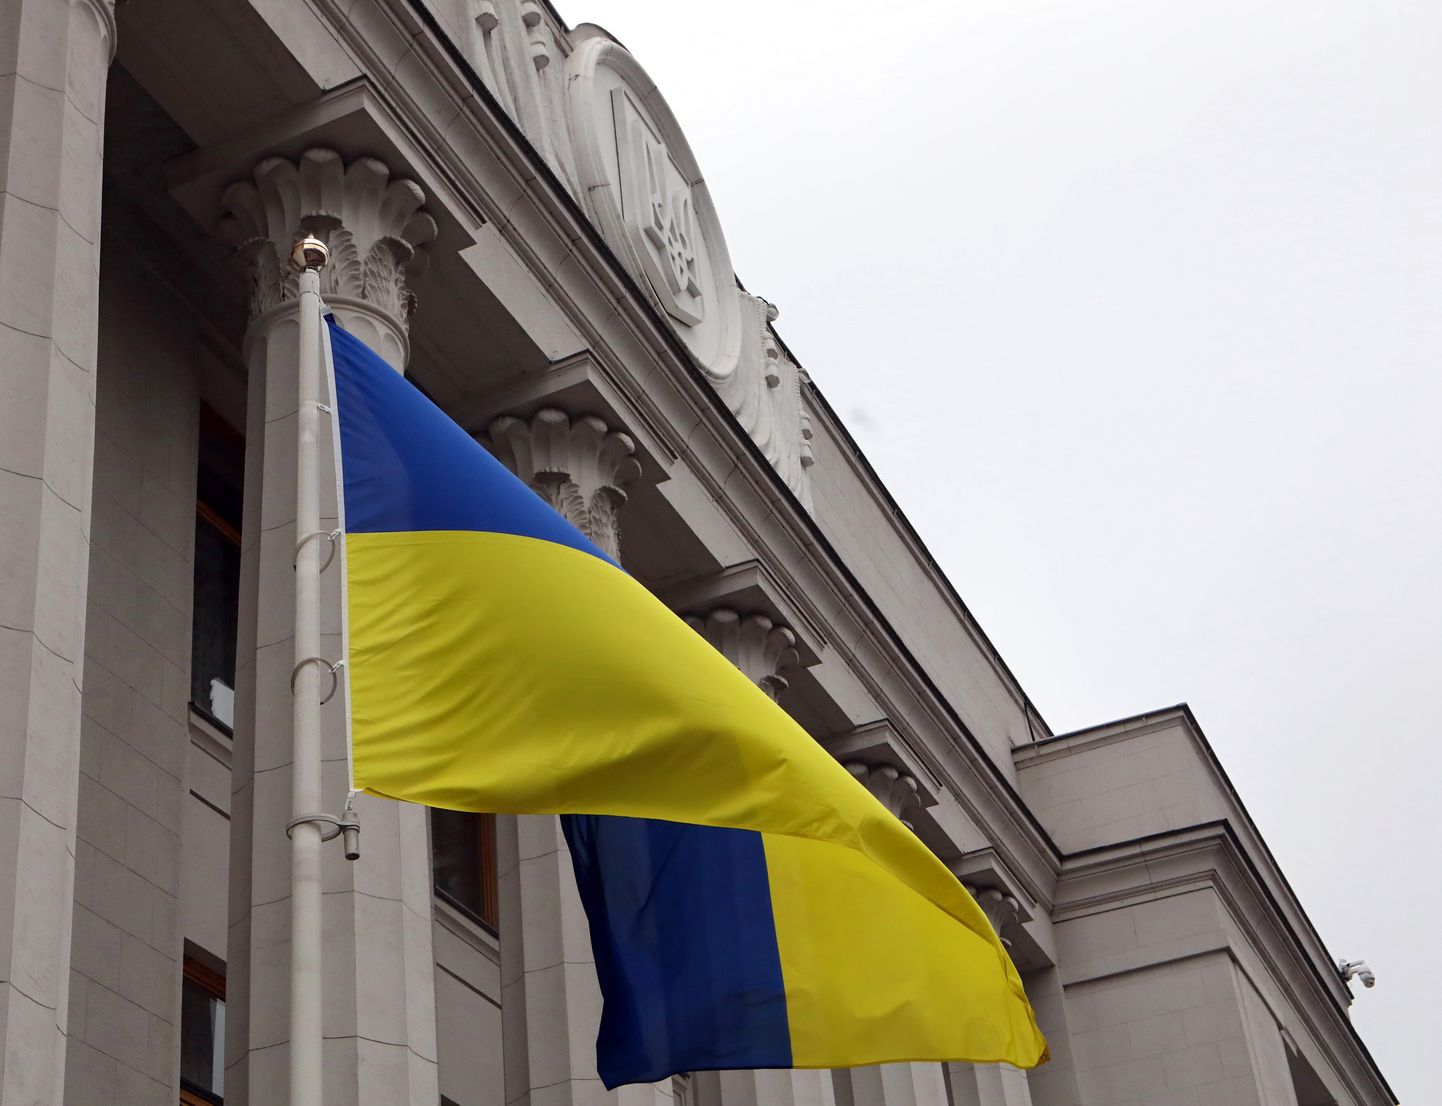 January 22, 2020, Kyiv, Ukraine: KYIV, UKRAINE - JANUARY 22, 2020 - The State Flag of Ukraine flies outside the Verkhovna Rada building on the Unity Day, Kyiv, capital of Ukraine. On this day, the country marks the 101st anniversary since the proclamation of the unification of the Ukrainian People's Republic (UPR) and the Western Ukrainian People's Republic (WUPR) which took place in Kyiv's Sofiiska Square on January 22, 1919. (Credit Image: © Volodymyr Tarasov/Ukrinform via ZUMA Wire)